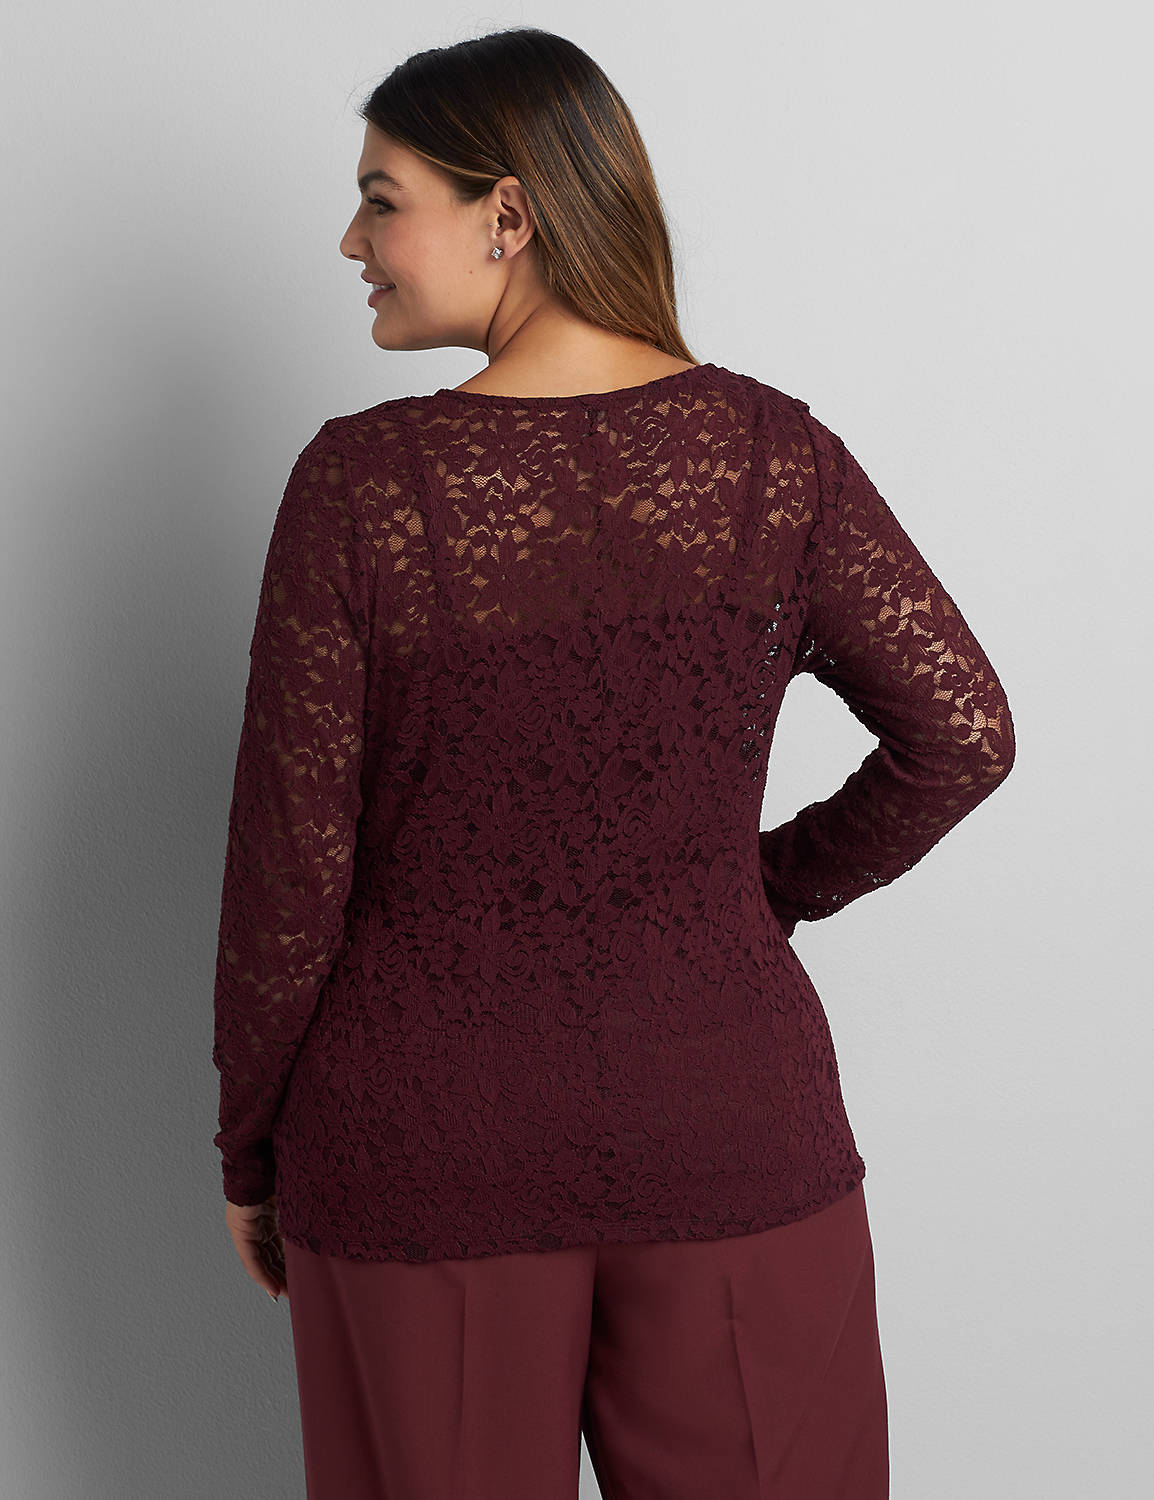 V-Neck Sheer Lace Top Product Image 2